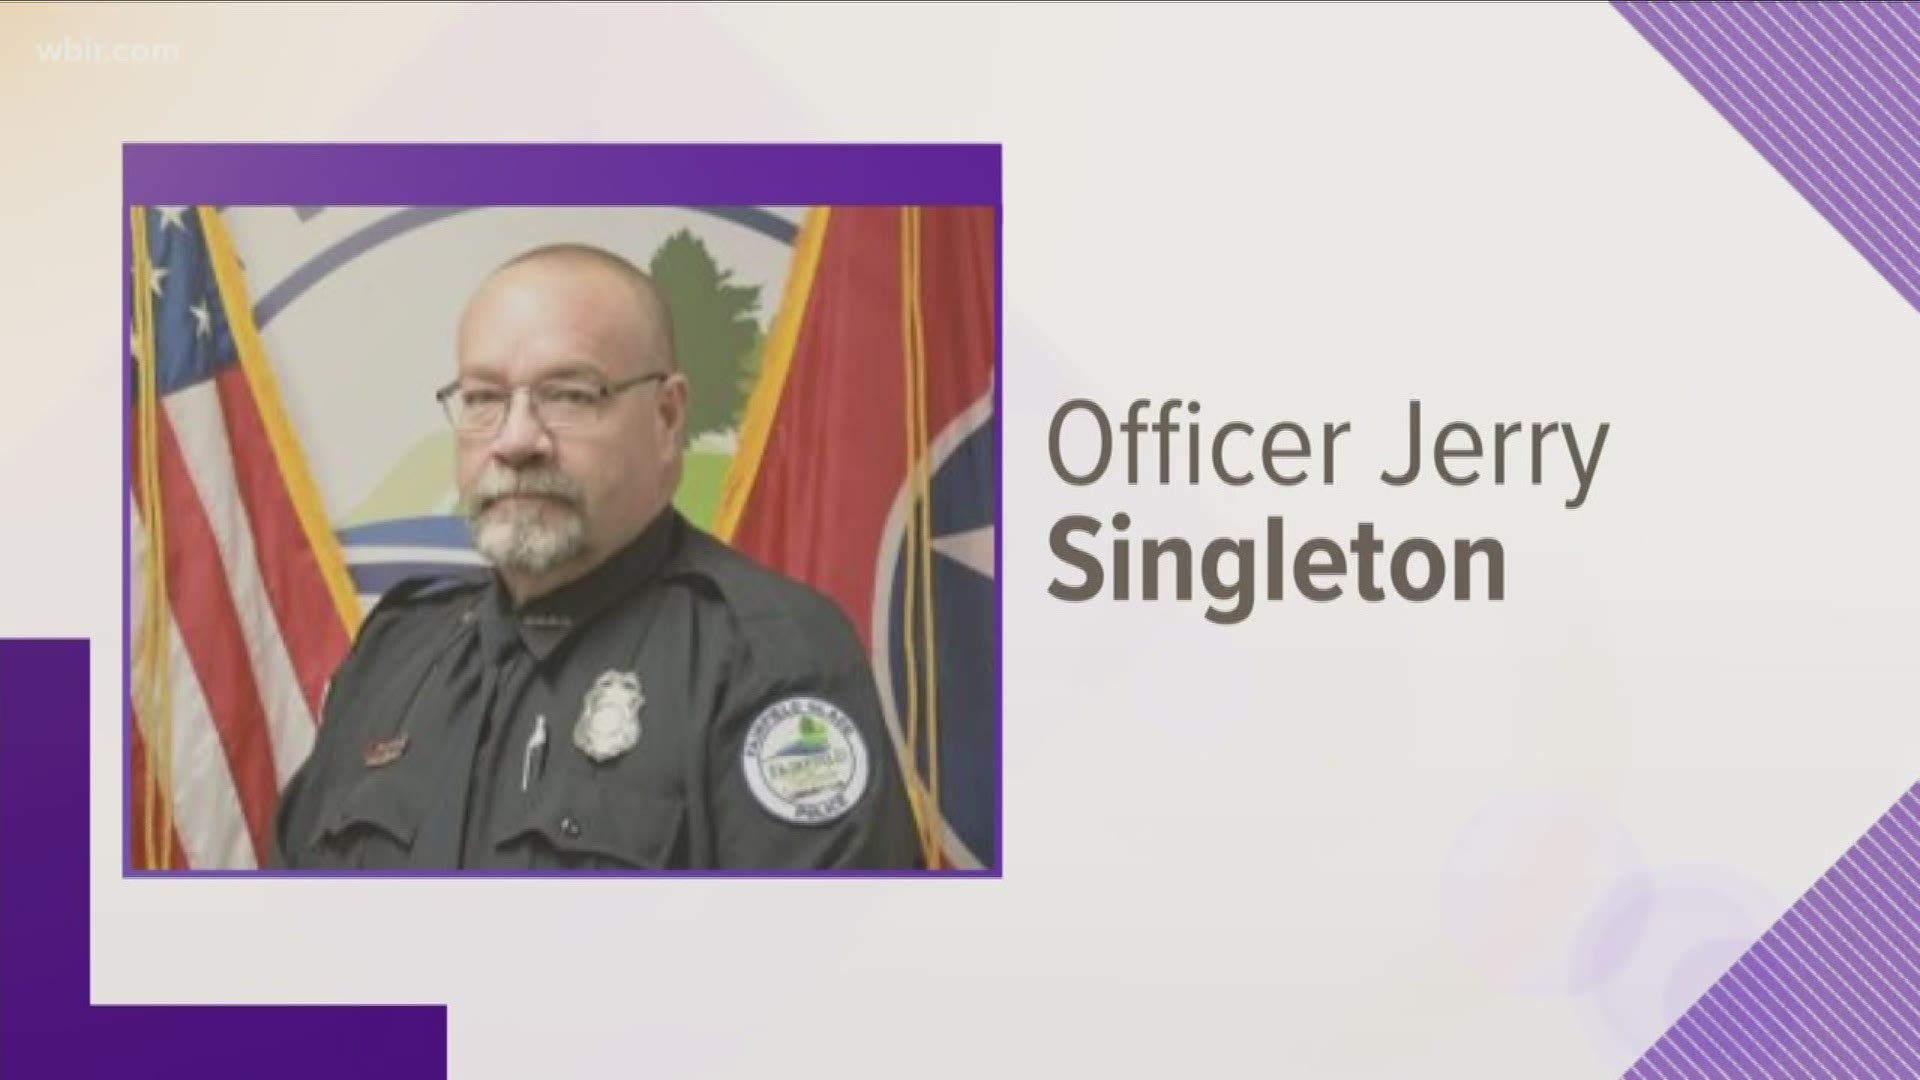 Chief Michael Williams on Facebook that Officer Jerry Singleton,52, died of natural caused during his shift on New Year's Eve.